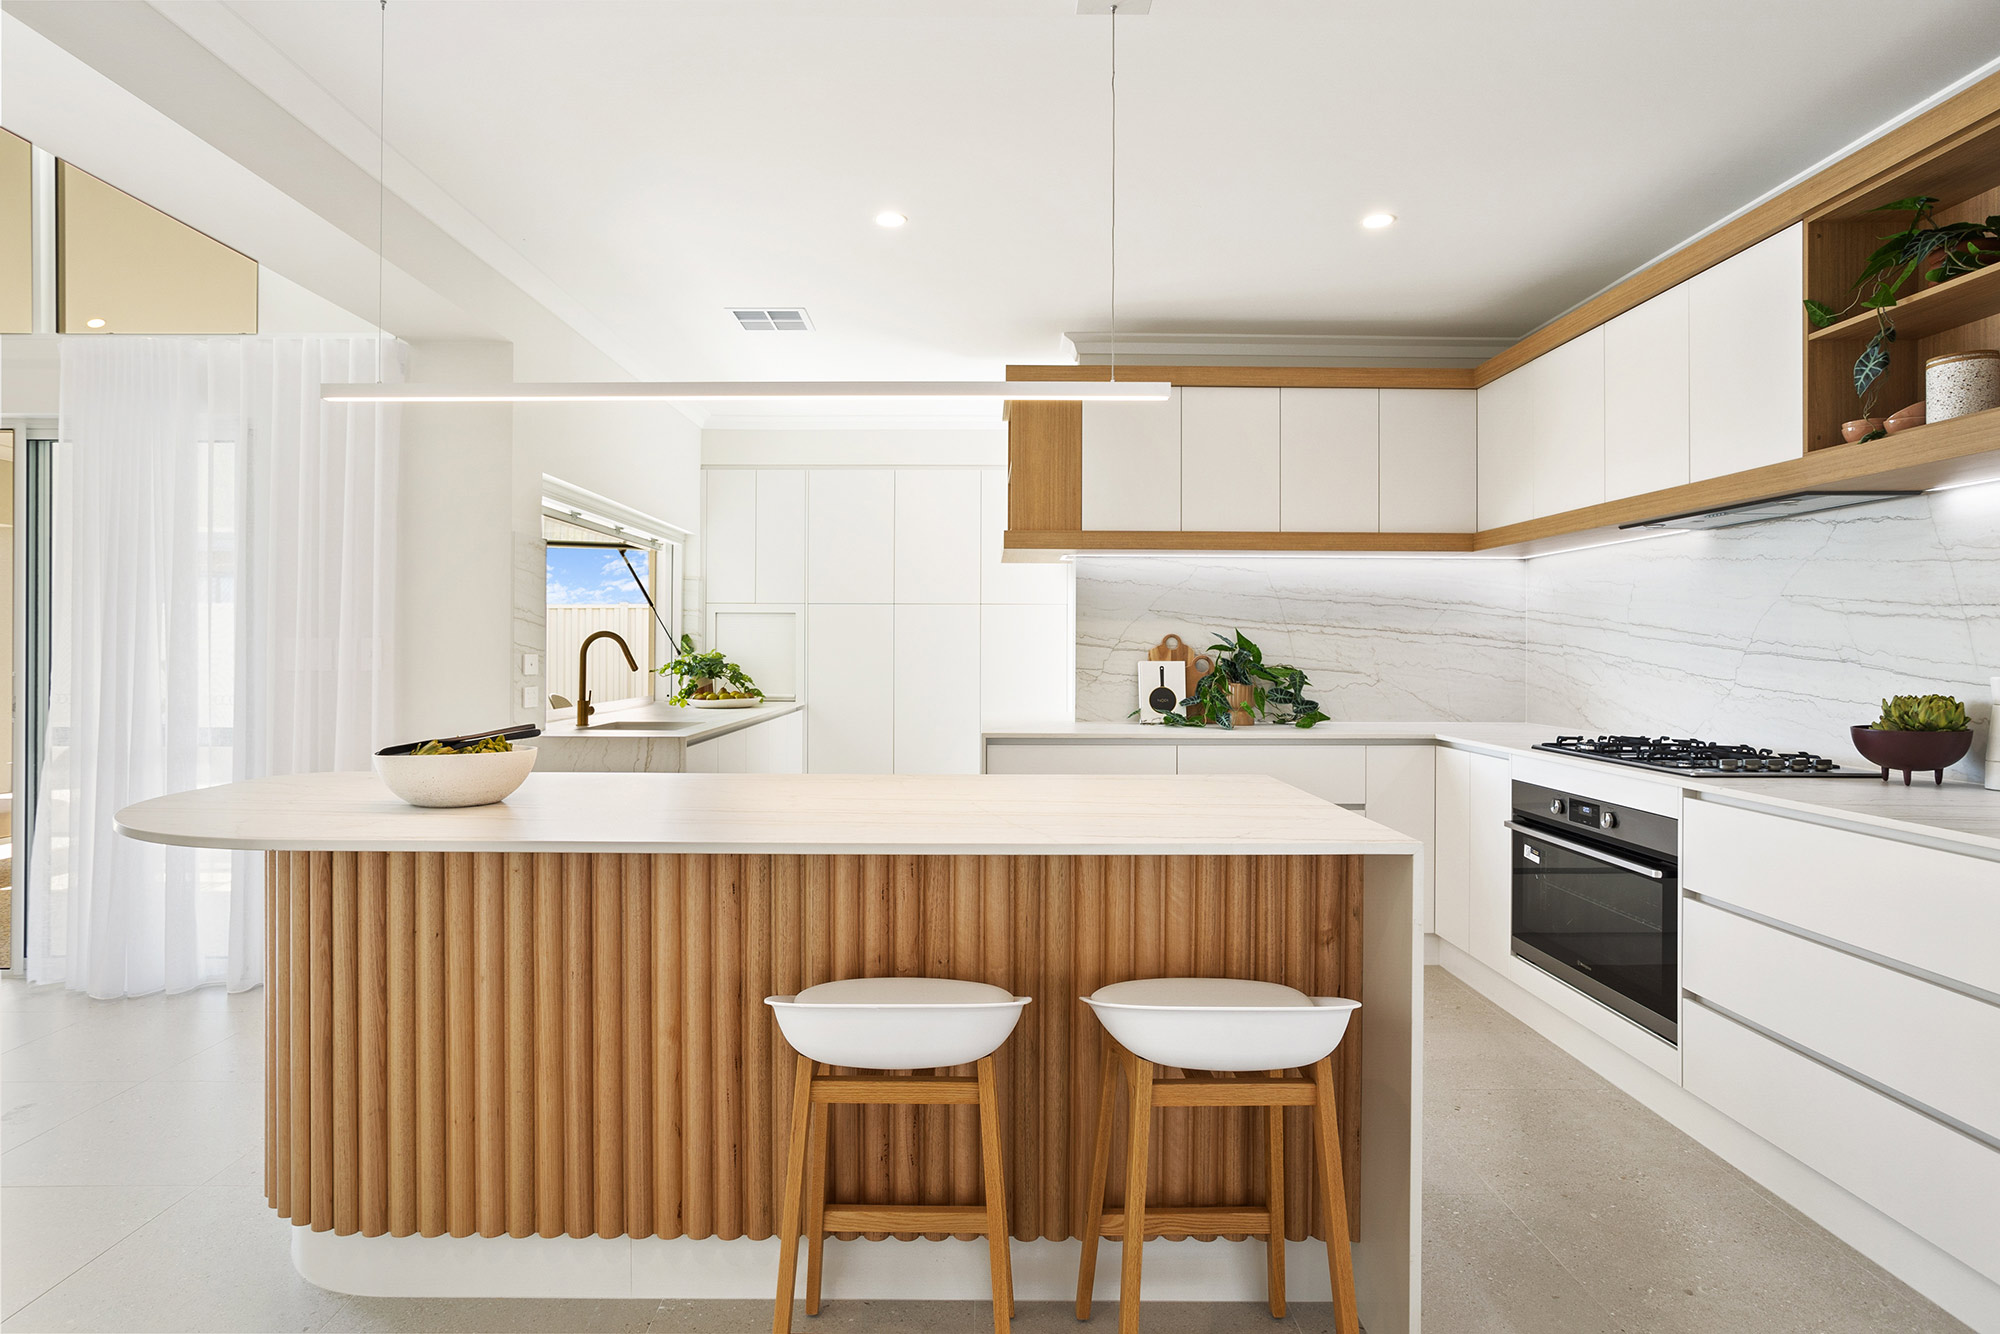 Image of Marley Display Home 4 in The warmth of the wood and Cosentino materials is the hallmark of this beautiful Australian kitchen - Cosentino